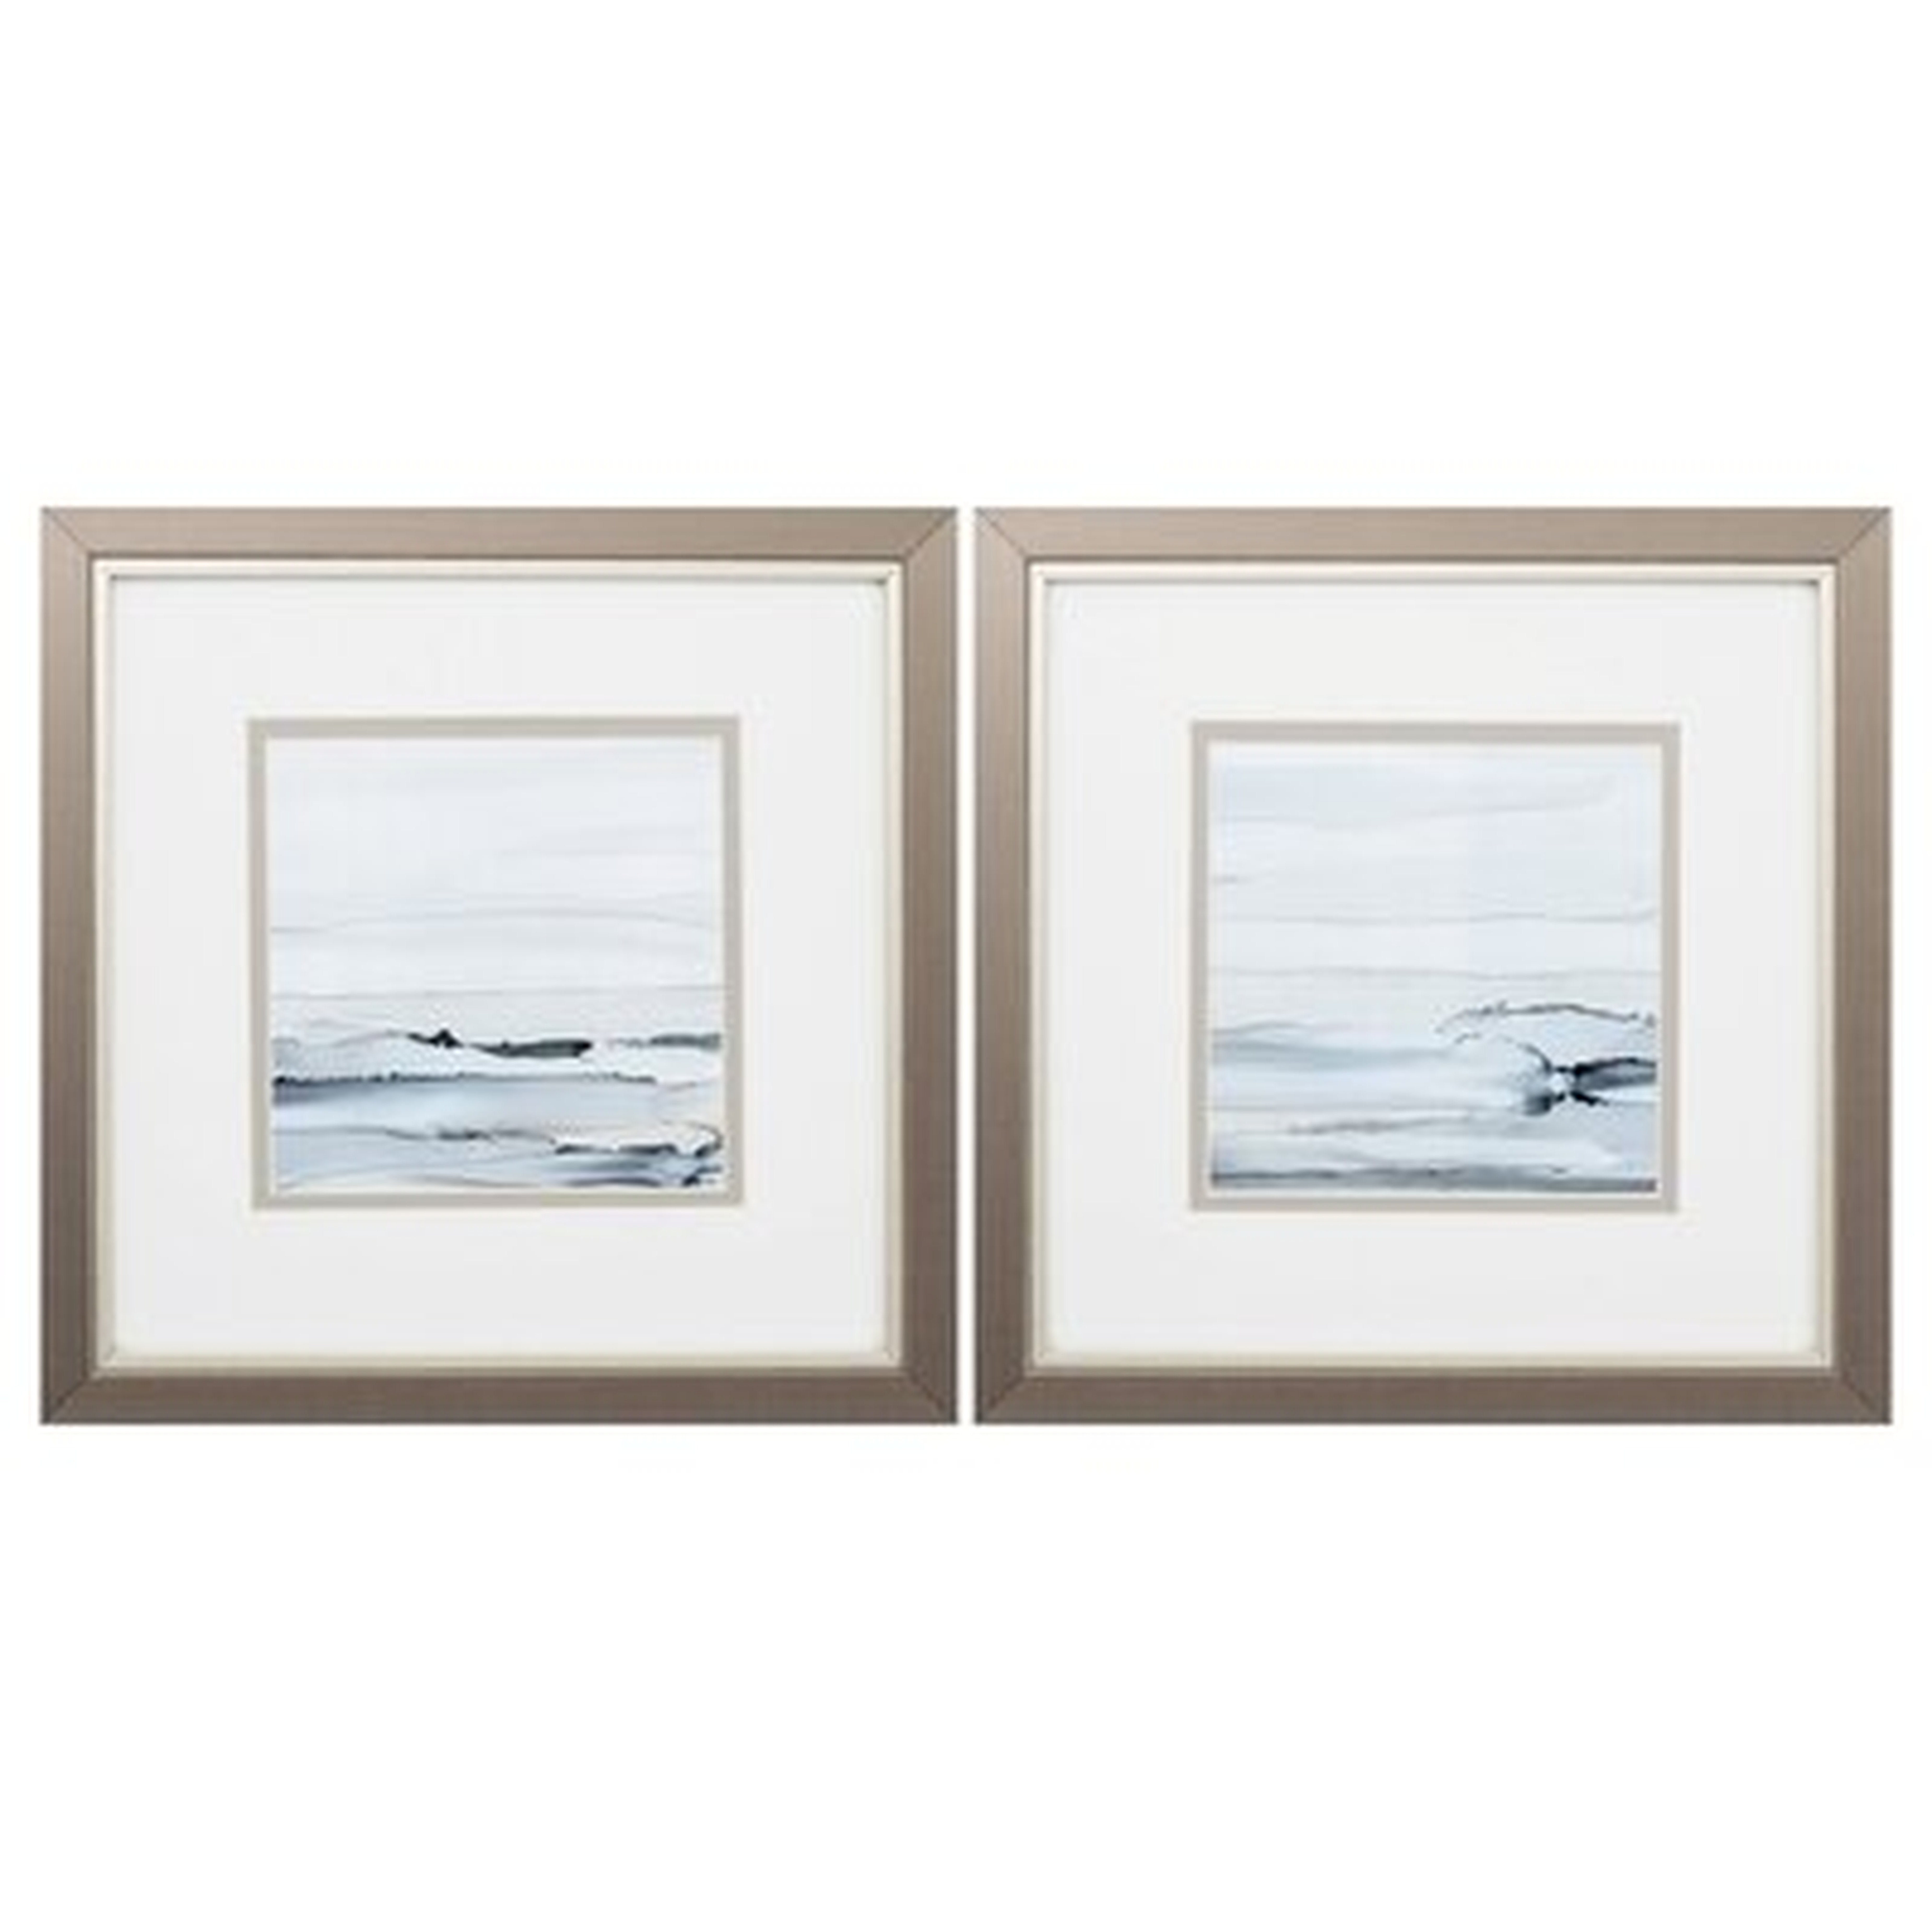 SUNKISSED HORIZONS S/2 - 2 Piece Picture Frame Print Set - Wayfair